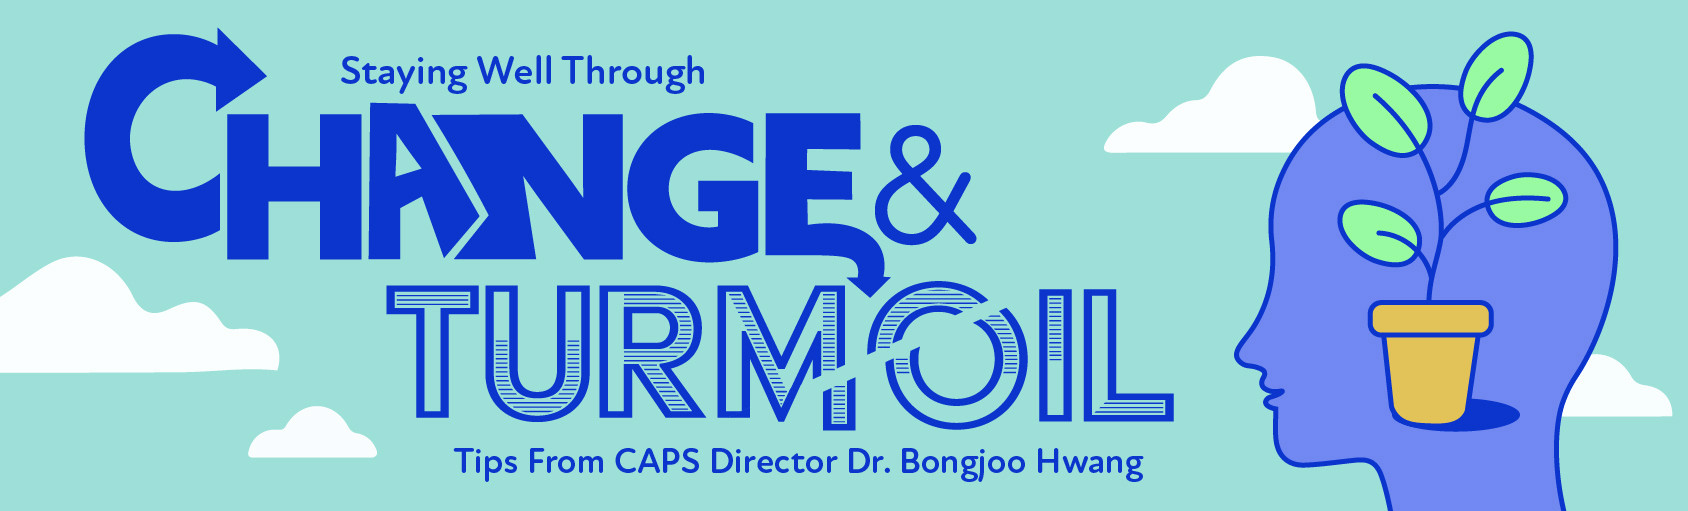 Staying Well Through Change & Turmoil - Tips From CAPS Director Dr. Bongjoo Hwang banner